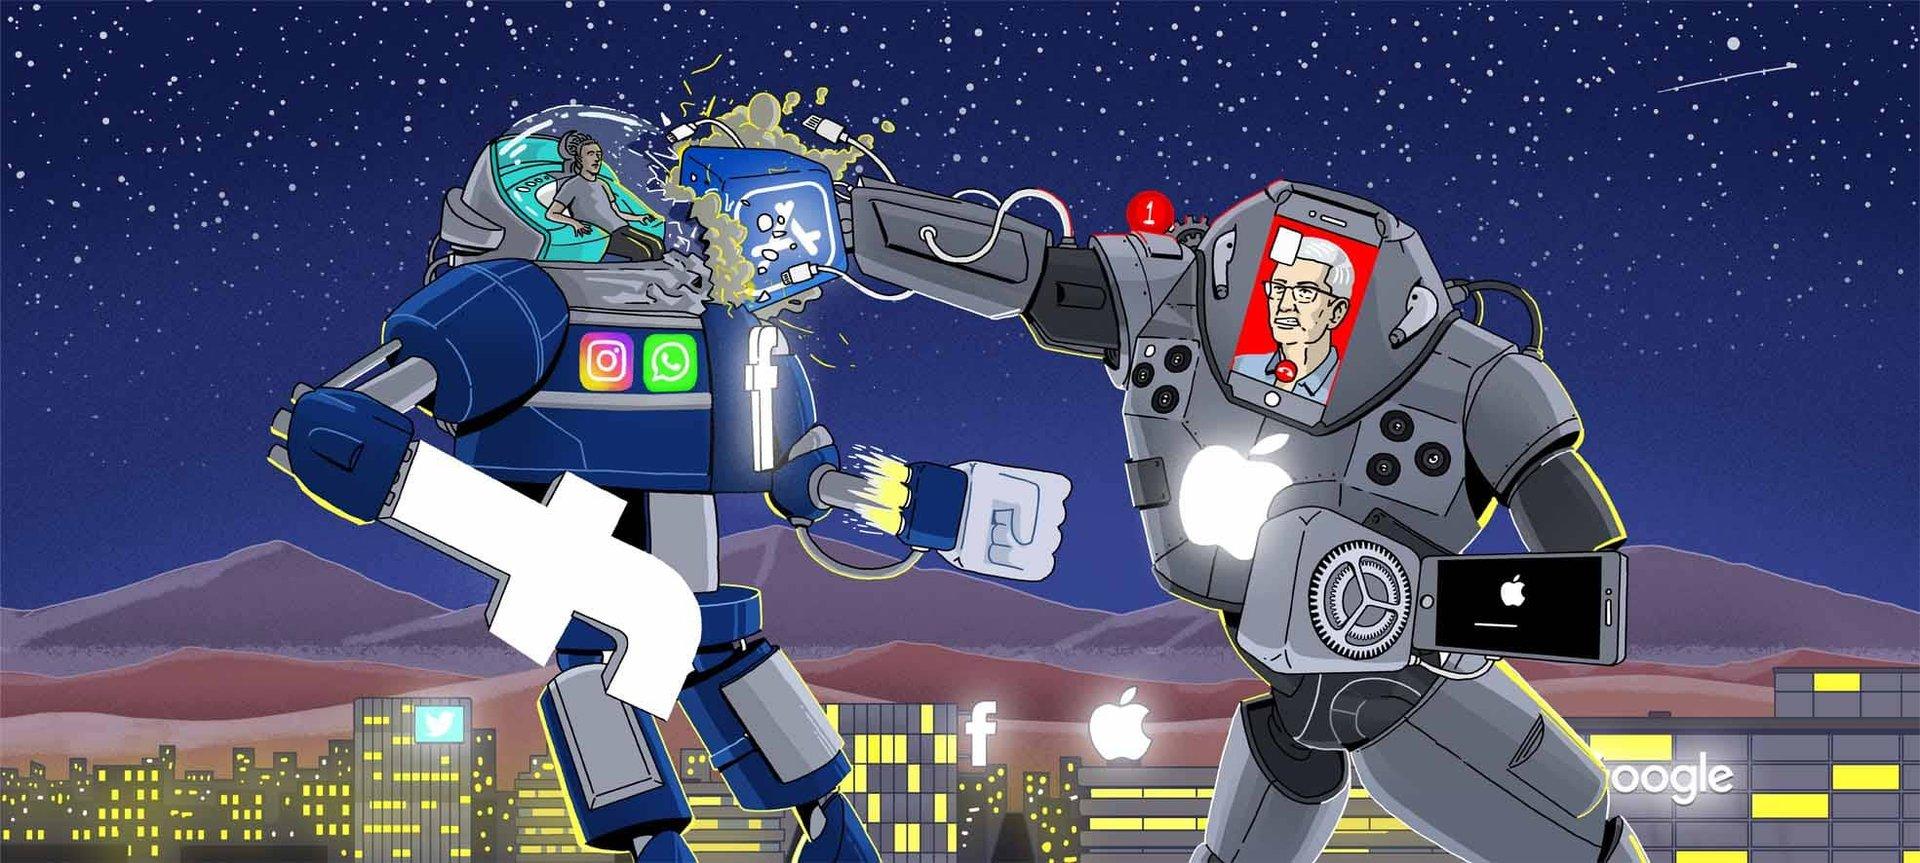 Illustration of Facebook and Apple robots fighting over control